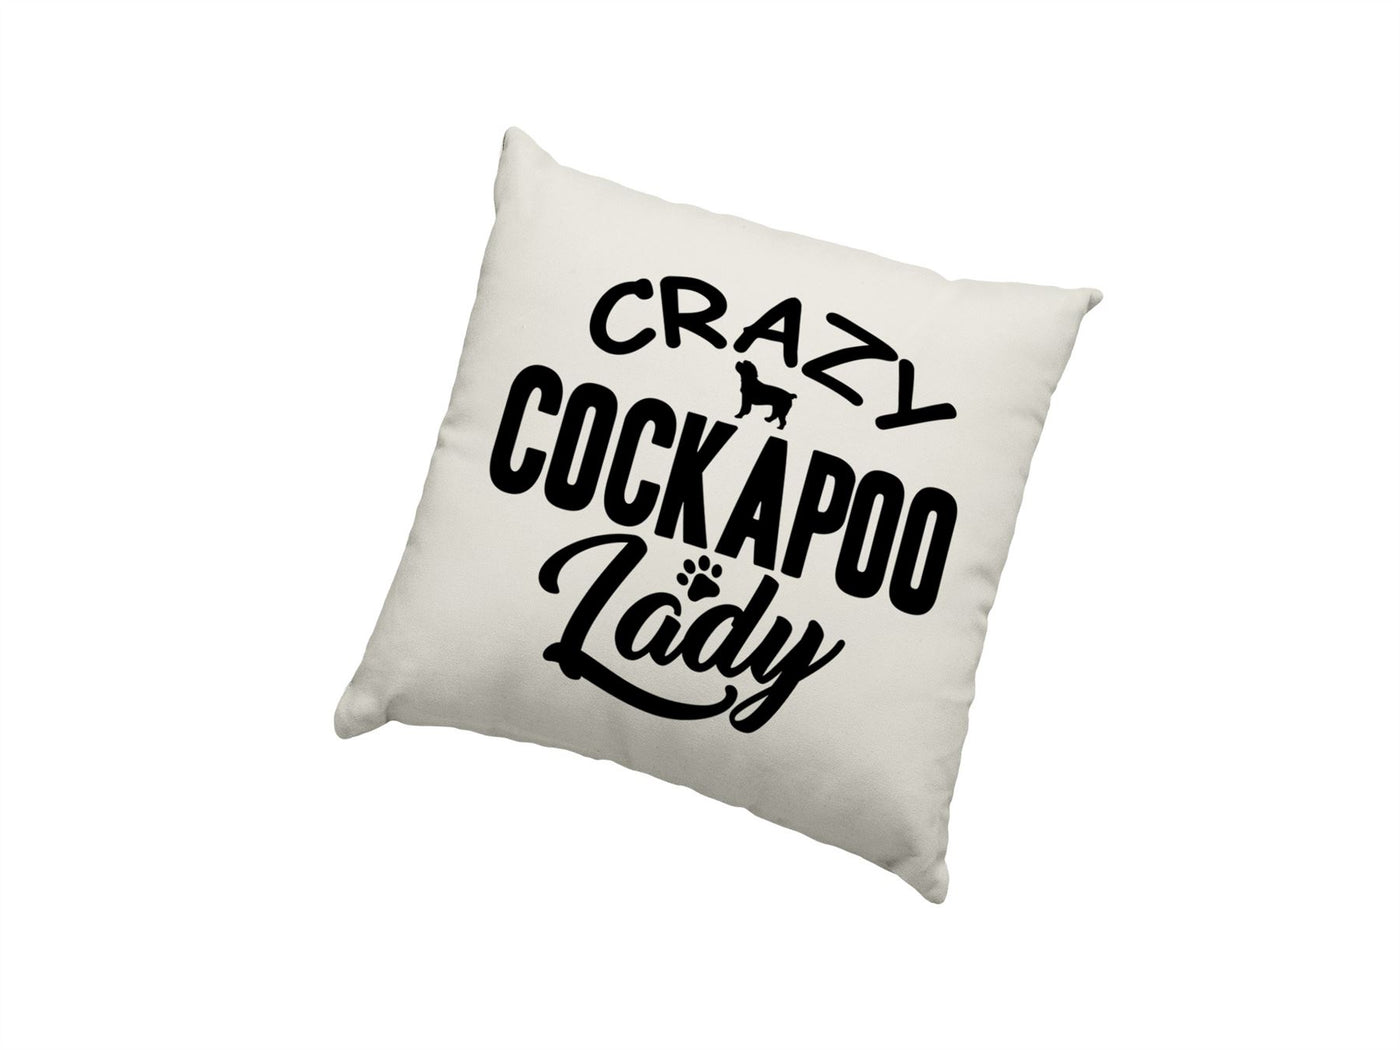 Crazy Cockapoo Lady Cushion Cover - Pet Dog owner Doggy Mum Puppy